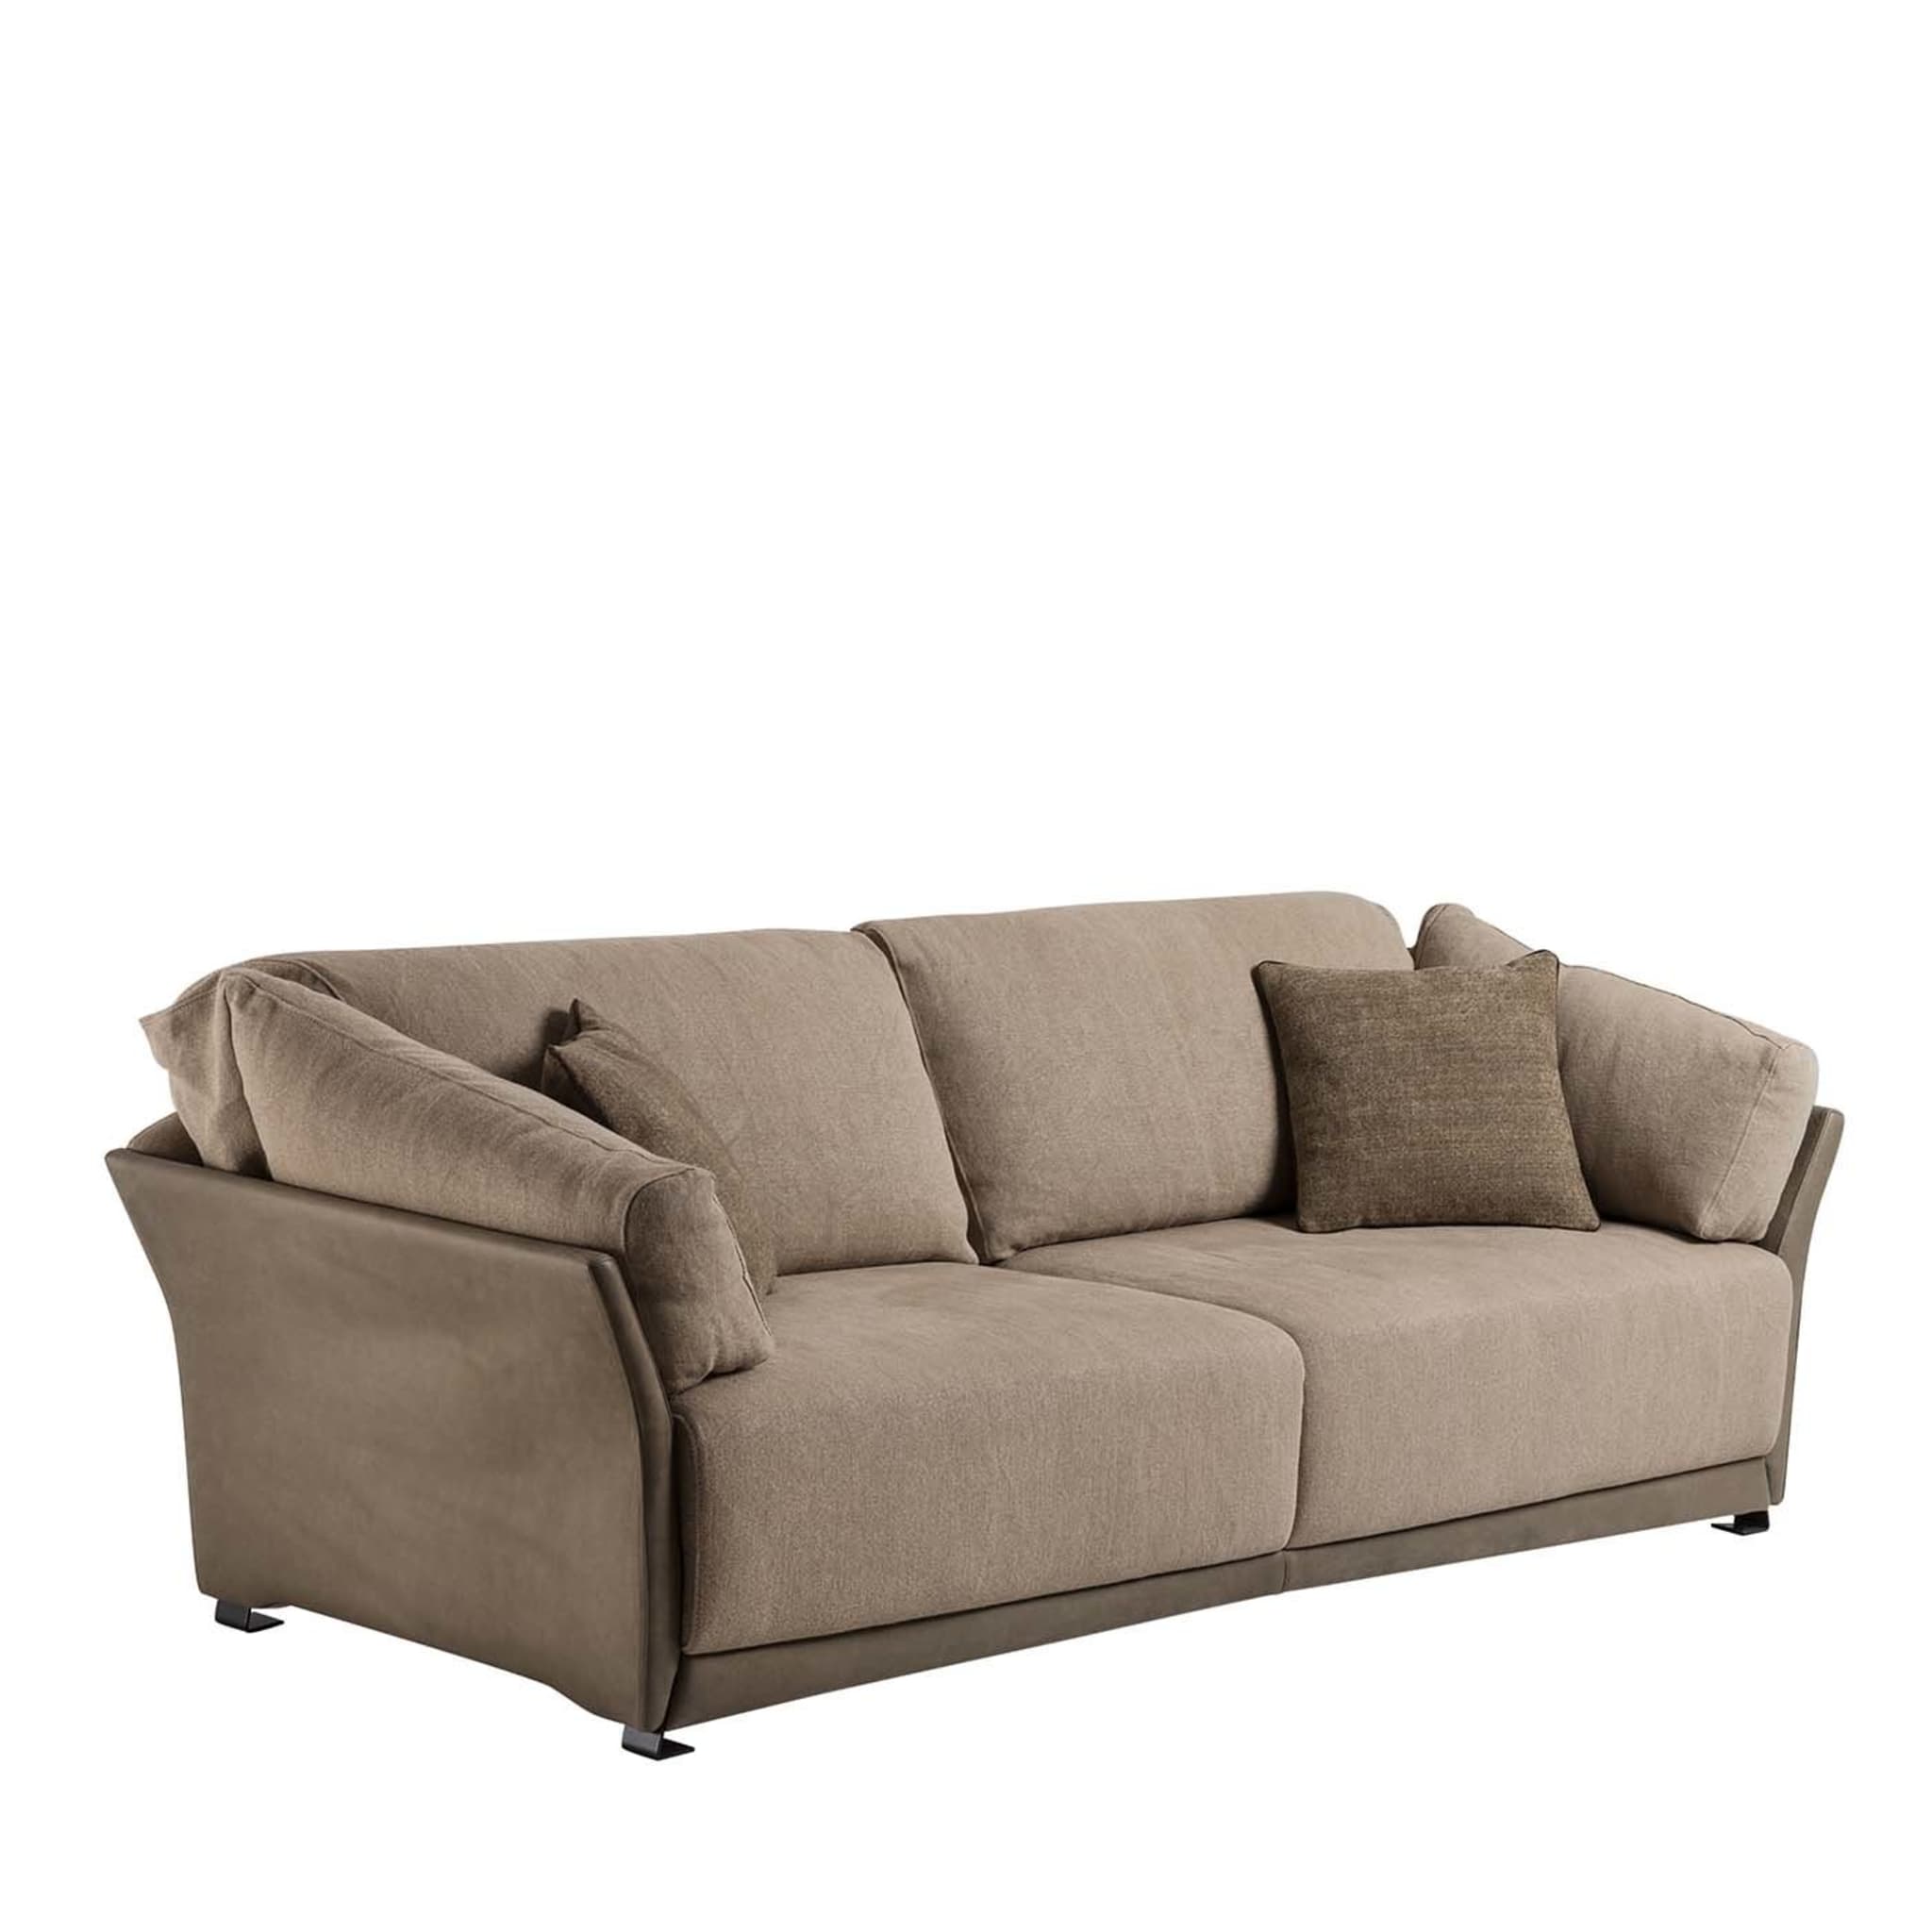 Paco 3-Seater Sofa Tribeca Collection by Marco and Giulio Mantellassi  - Main view